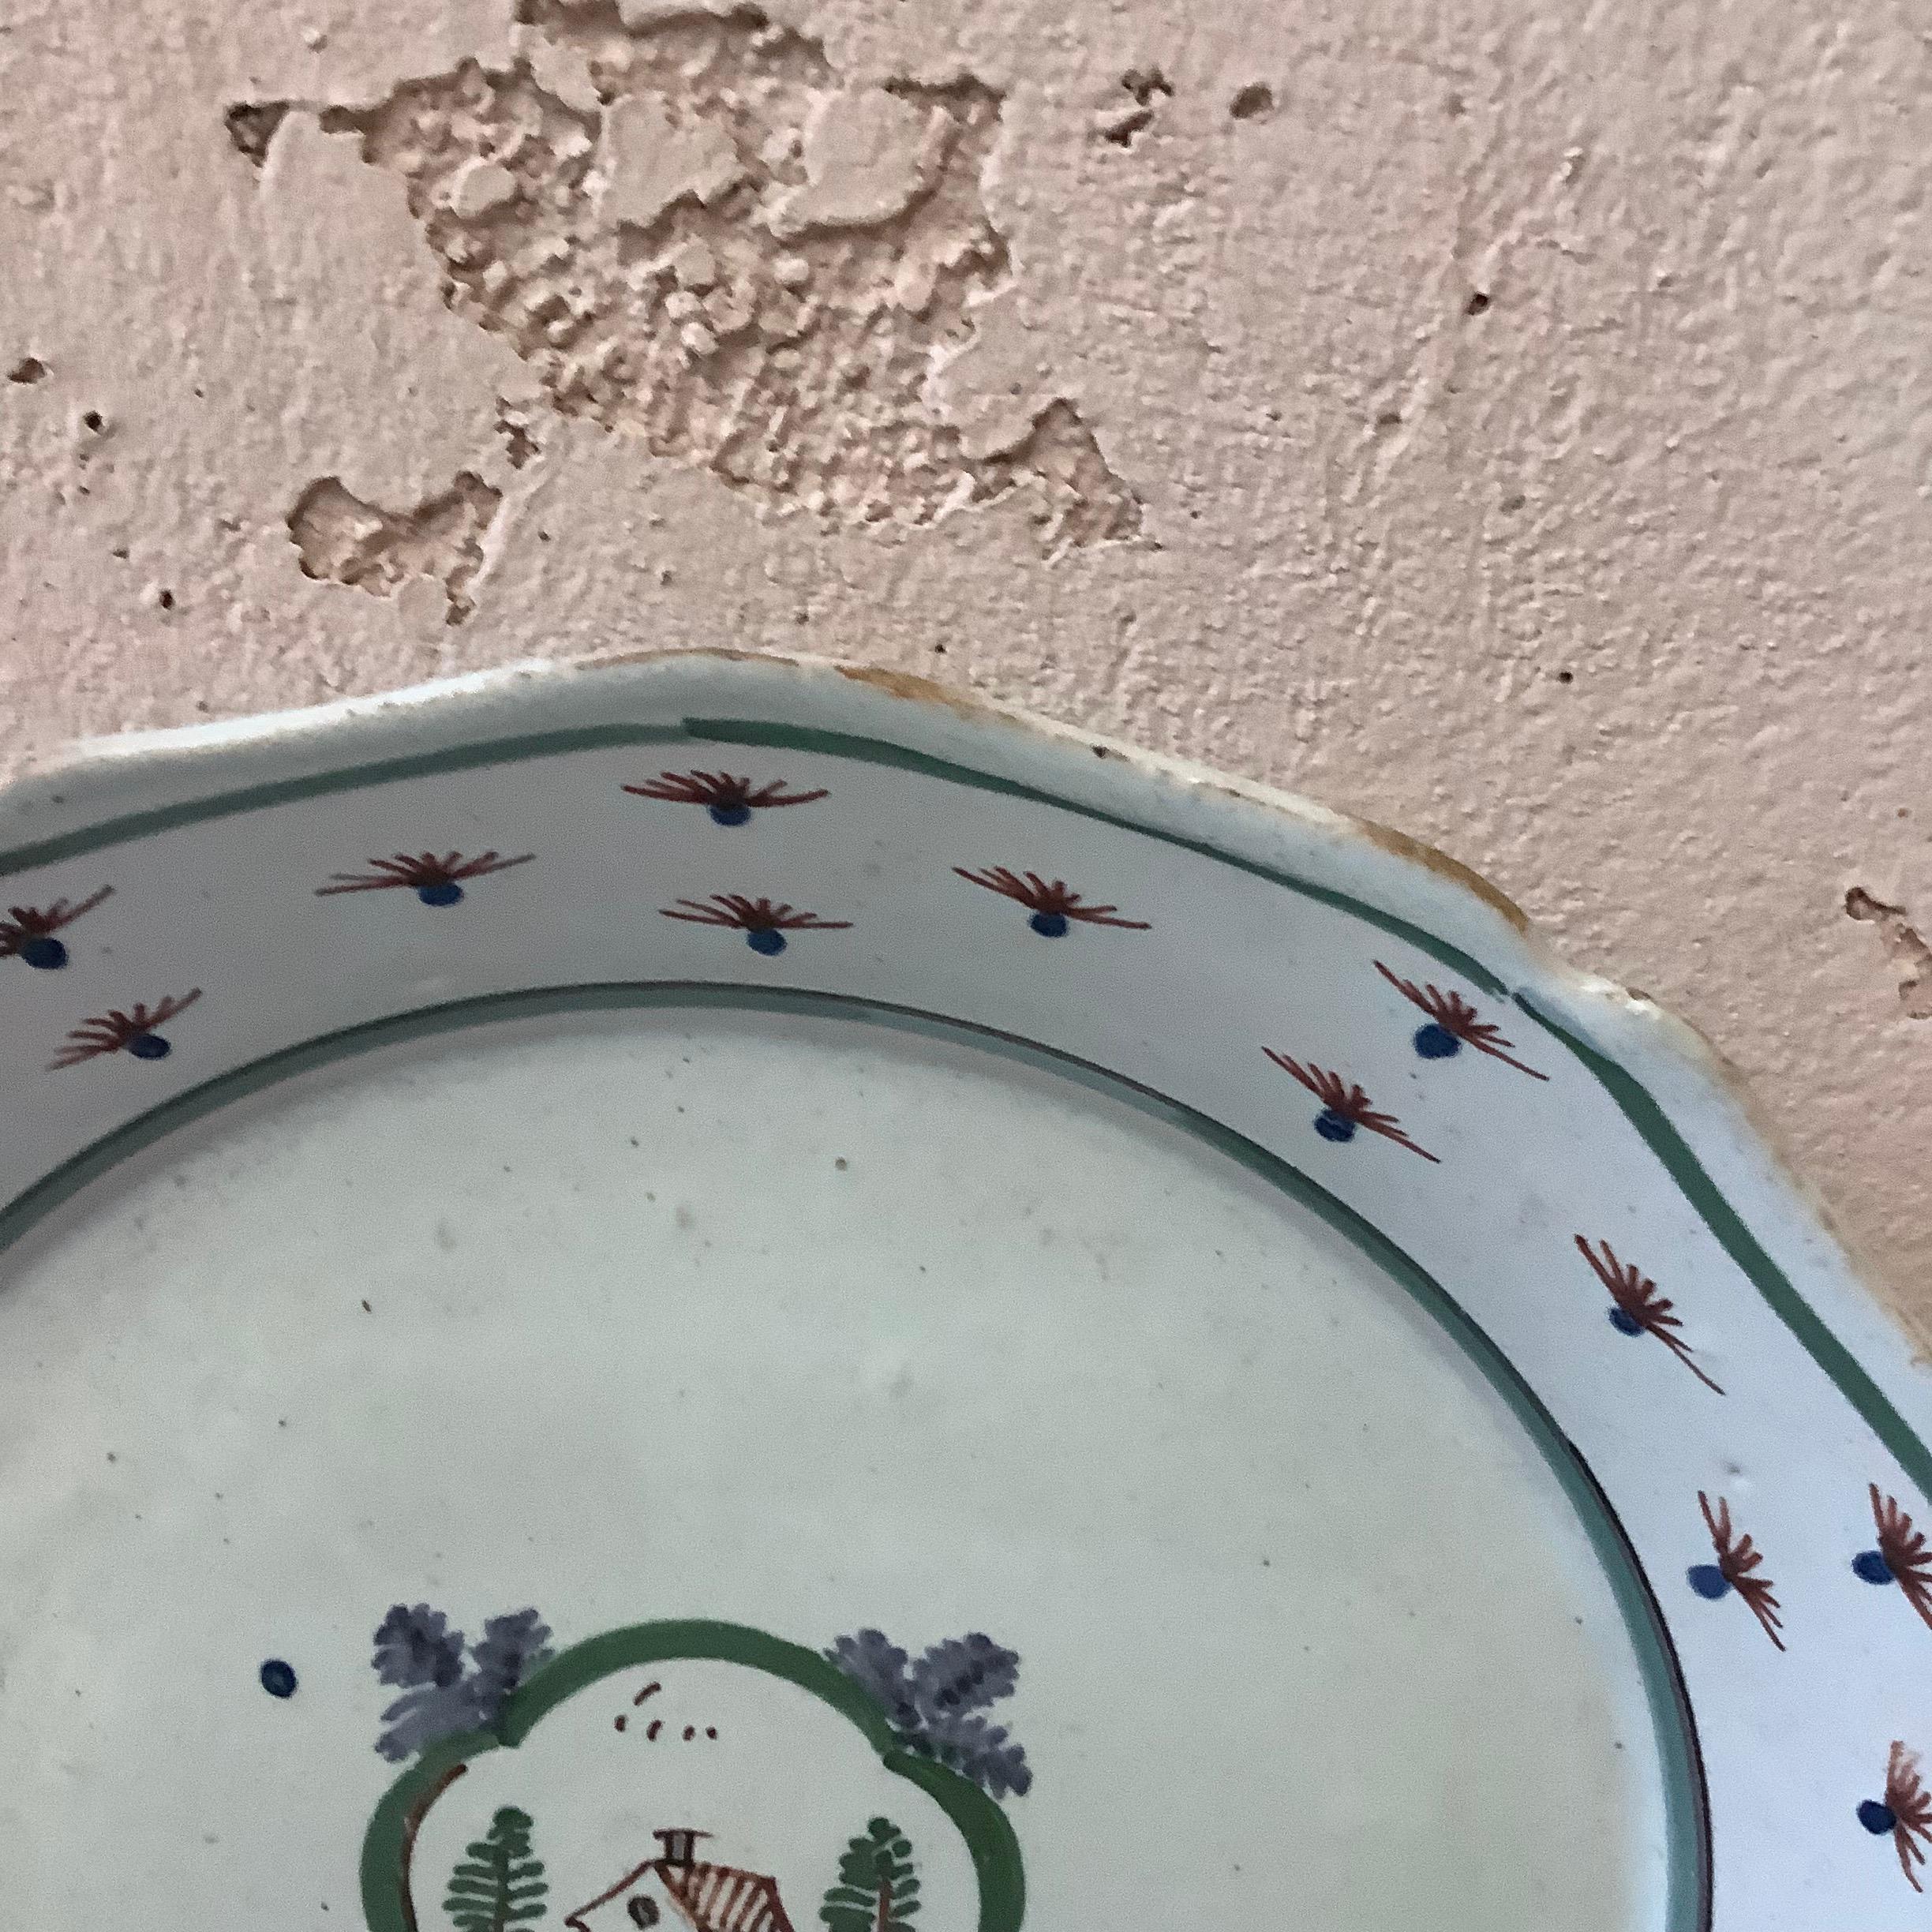 18th century French faience Nevers plate.
House with trees on the center.
Border with flowers.